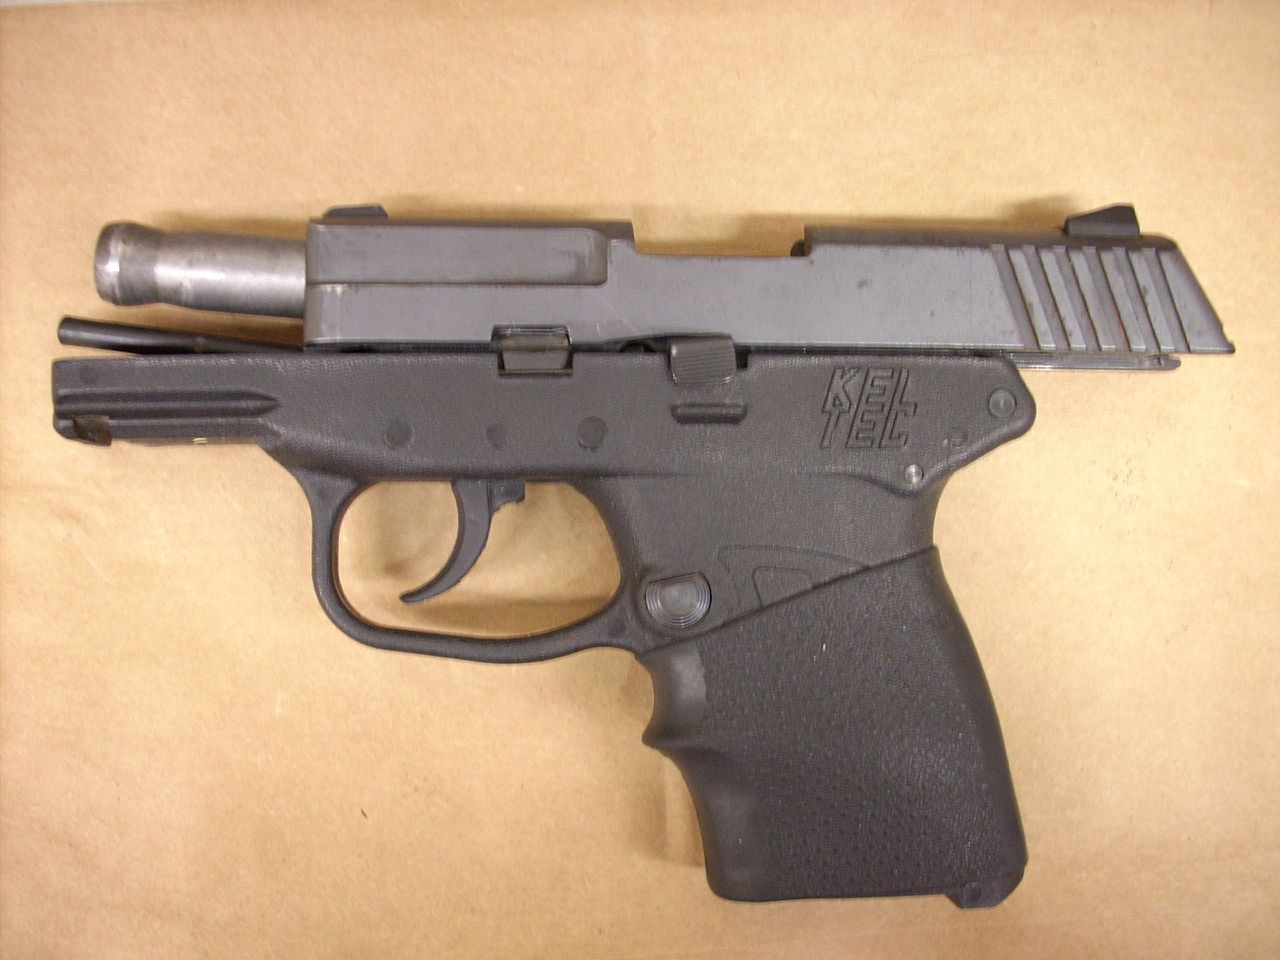 The handgun used in the shooting death of Trayvon Martin is seen this handout photo provided by the State Attorney's Office on May 17, 2012. Hundreds of pages of case documents were released in connection with the Feb. 26 shooting that triggered civil rights protests as well as a debate over guns, self-defense laws and race relations in America. George Zimmerman has pleaded not guilty to a second-degree murder charge and says he killed Martin in self-defense. REUTERS/State Attorney's Office/Handout (UNITED STATES - Tags: CRIME LAW) FOR EDITORIAL USE ONLY. NOT FOR SALE FOR MARKETING OR ADVERTISING CAMPAIGNS. THIS IMAGE HAS BEEN SUPPLIED BY A THIRD PARTY. IT IS DISTRIBUTED, EXACTLY AS RECEIVED BY REUTERS, AS A SERVICE TO CLIENTS